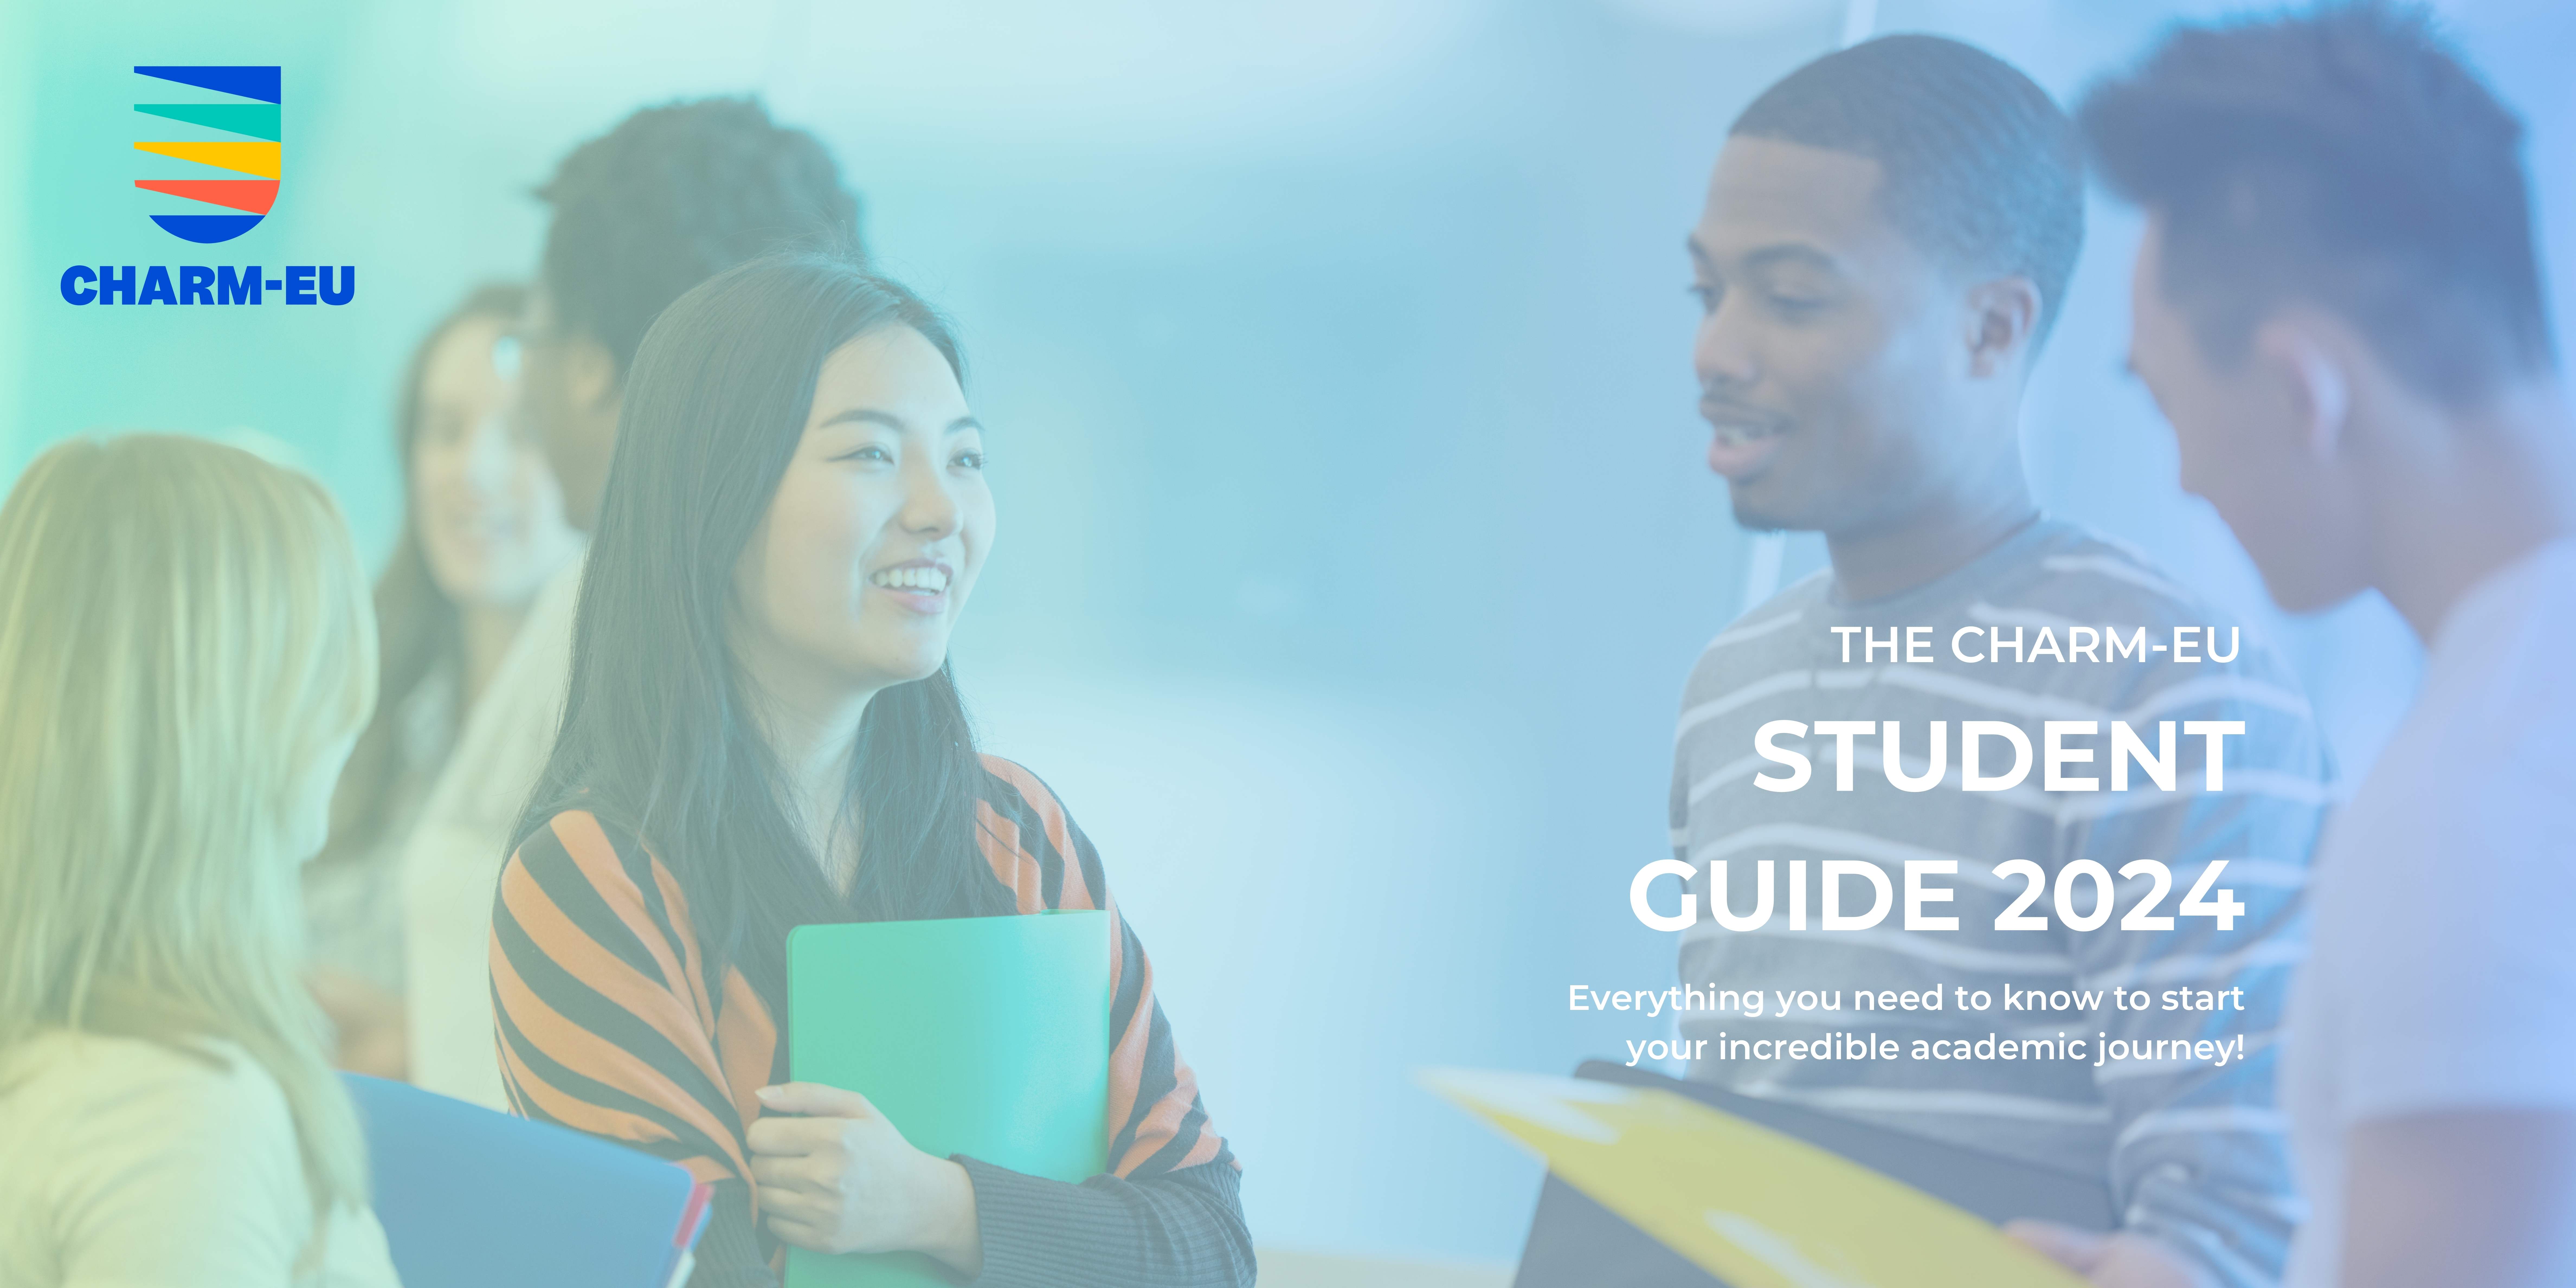 The CHARM-EU Student Guide 2024 Everything you need to know to start your incredible academic journey